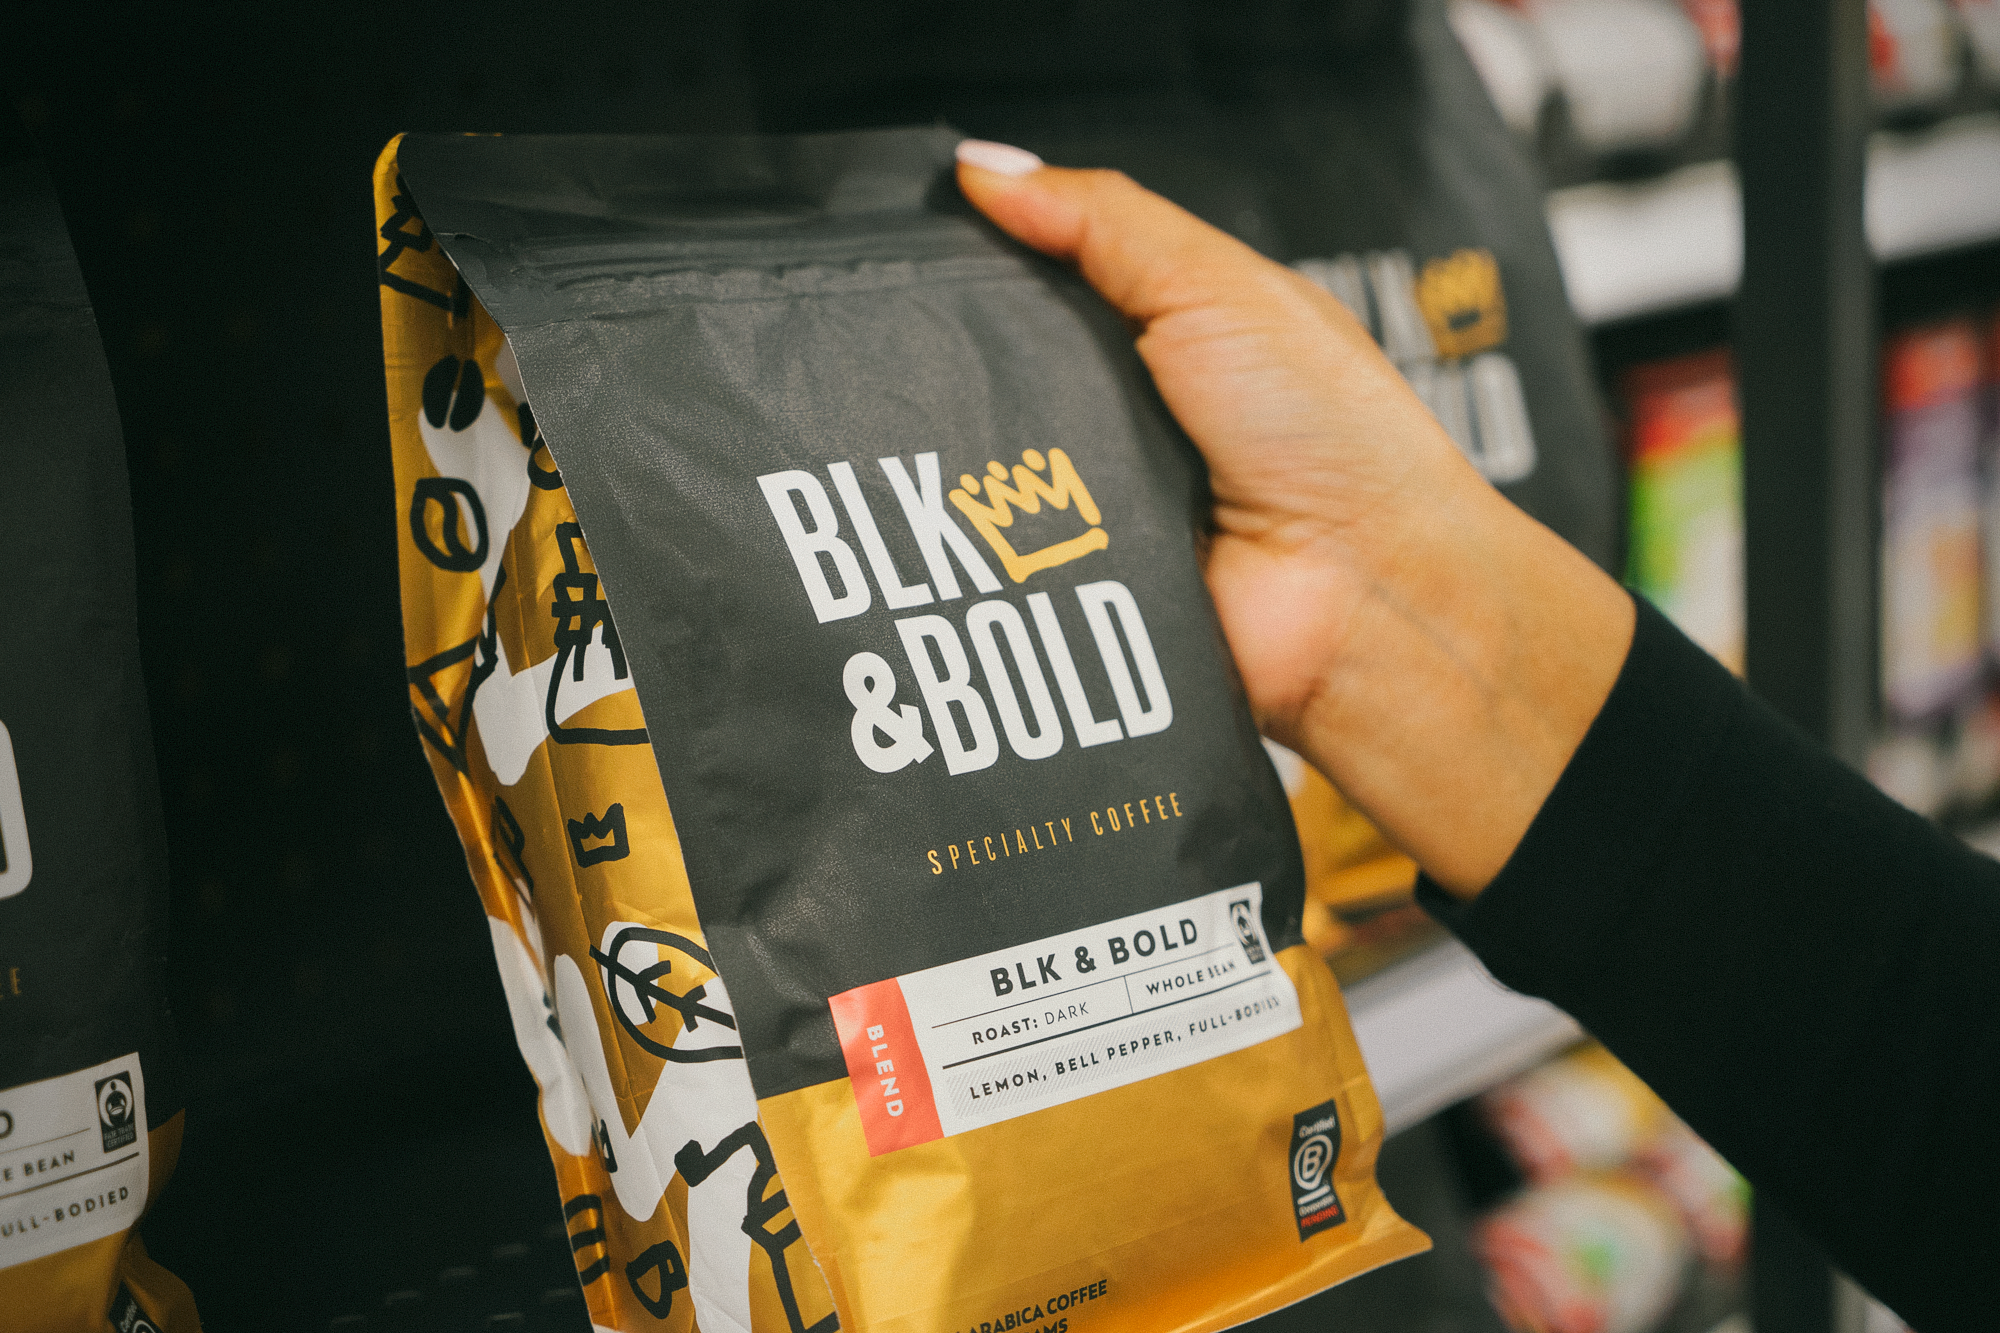 A package of BLK & Bold coffee held by a hand against some retail shelves. 